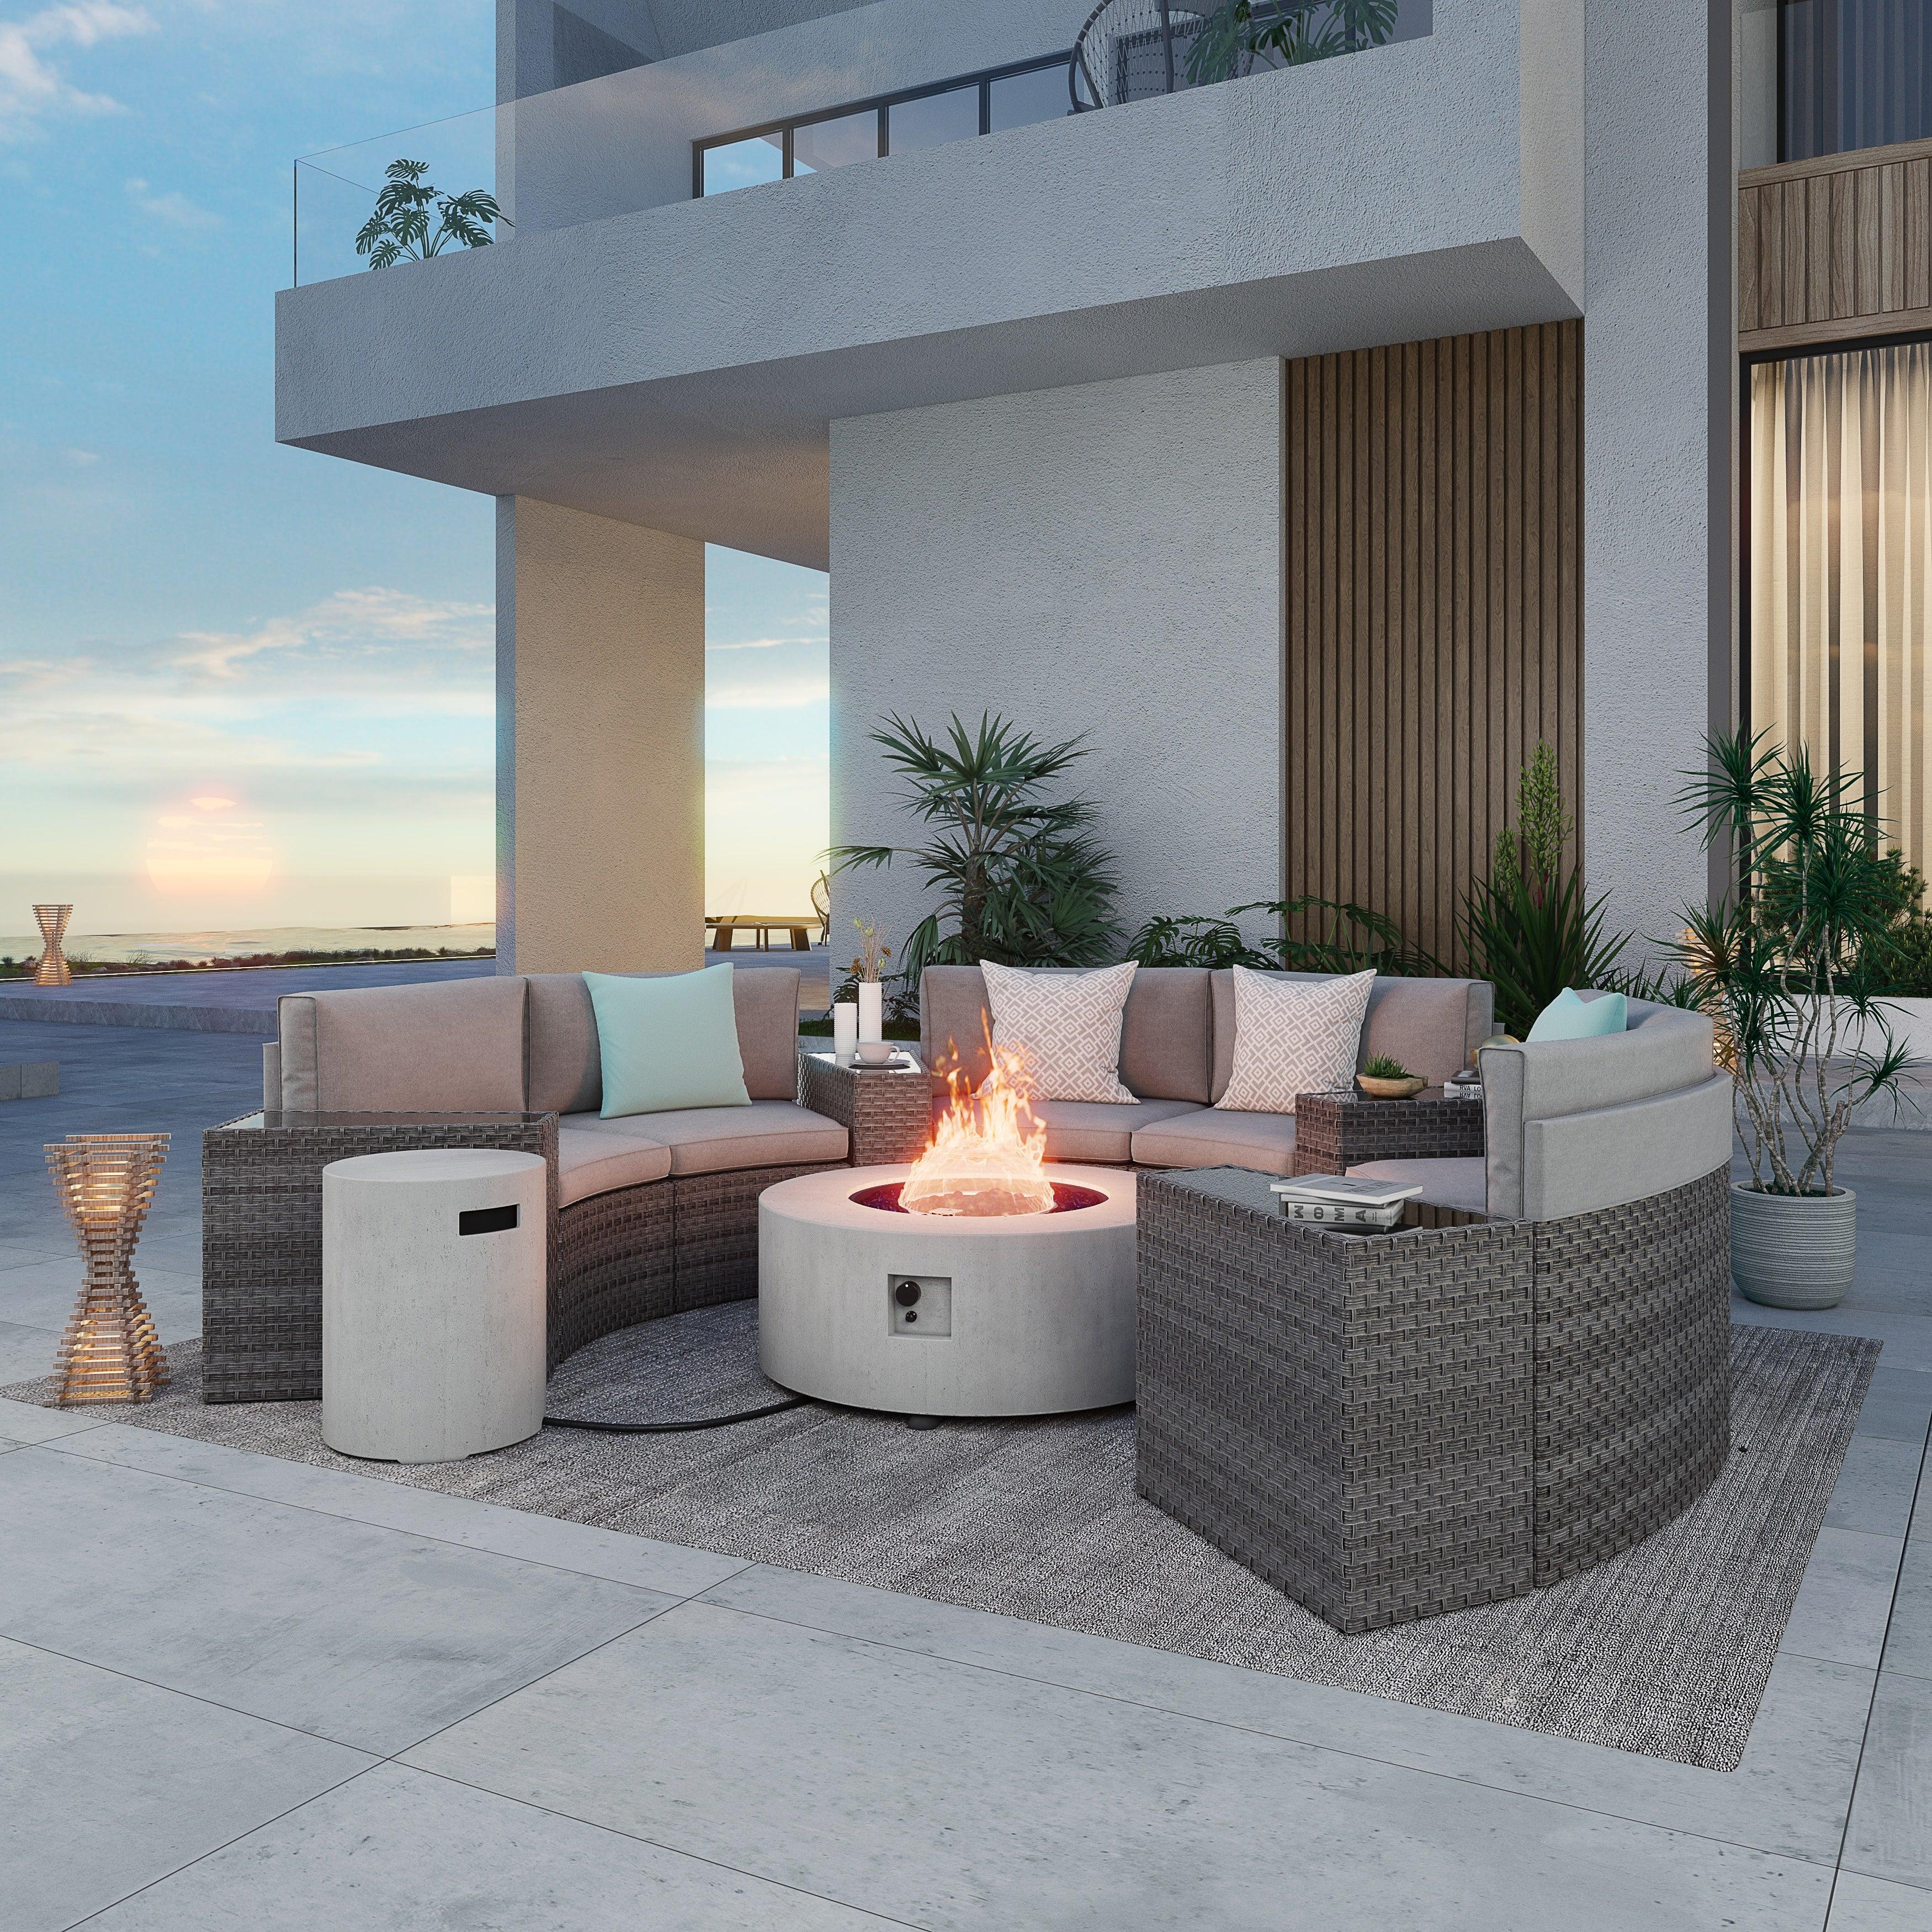 Boboli Modern Wicker Outdoor Furniture, 6-seater Grey Wicker Curved Sectional sofas with grey cushions, 4 side tables + 1 grey Propane Fire Pit with tank holder, front view- Jardina Furniture#color_Grey